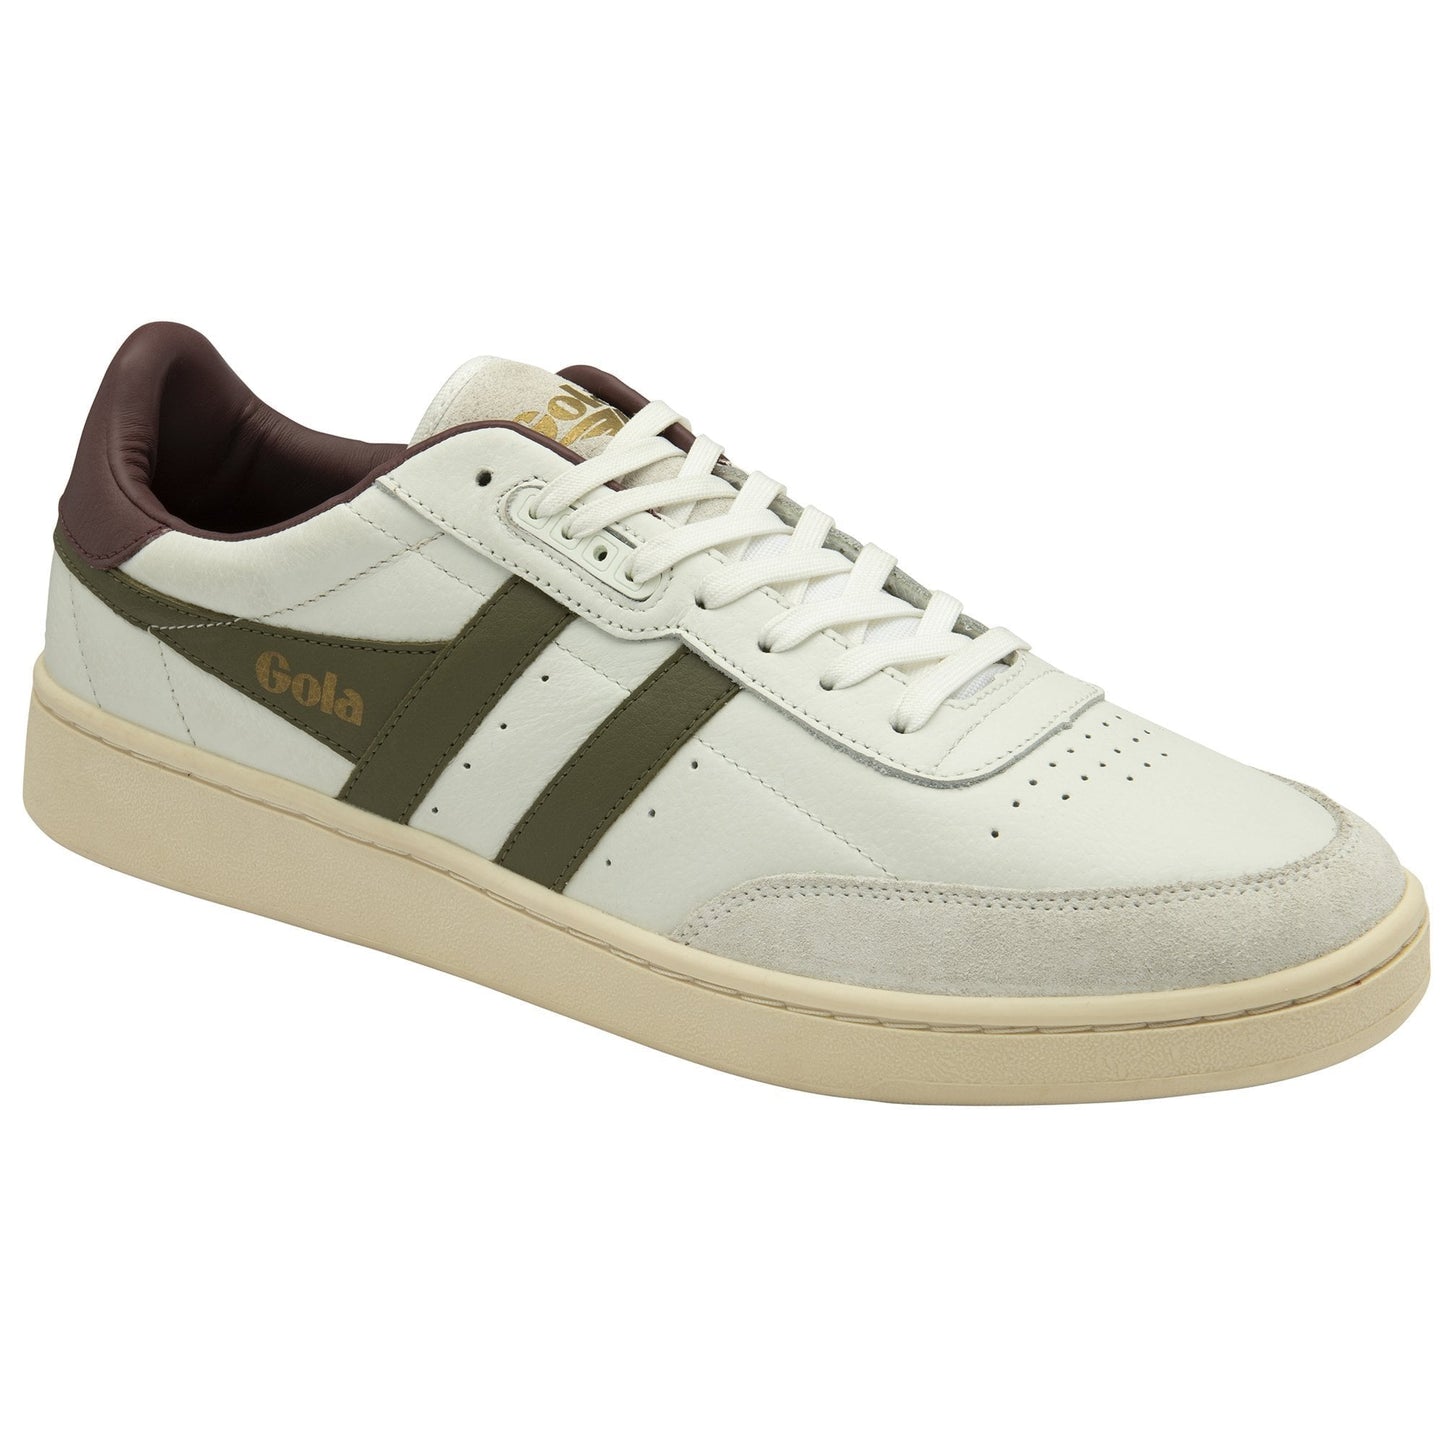 GOLA MEN'S CONTACT LEATHER SNEAKERS